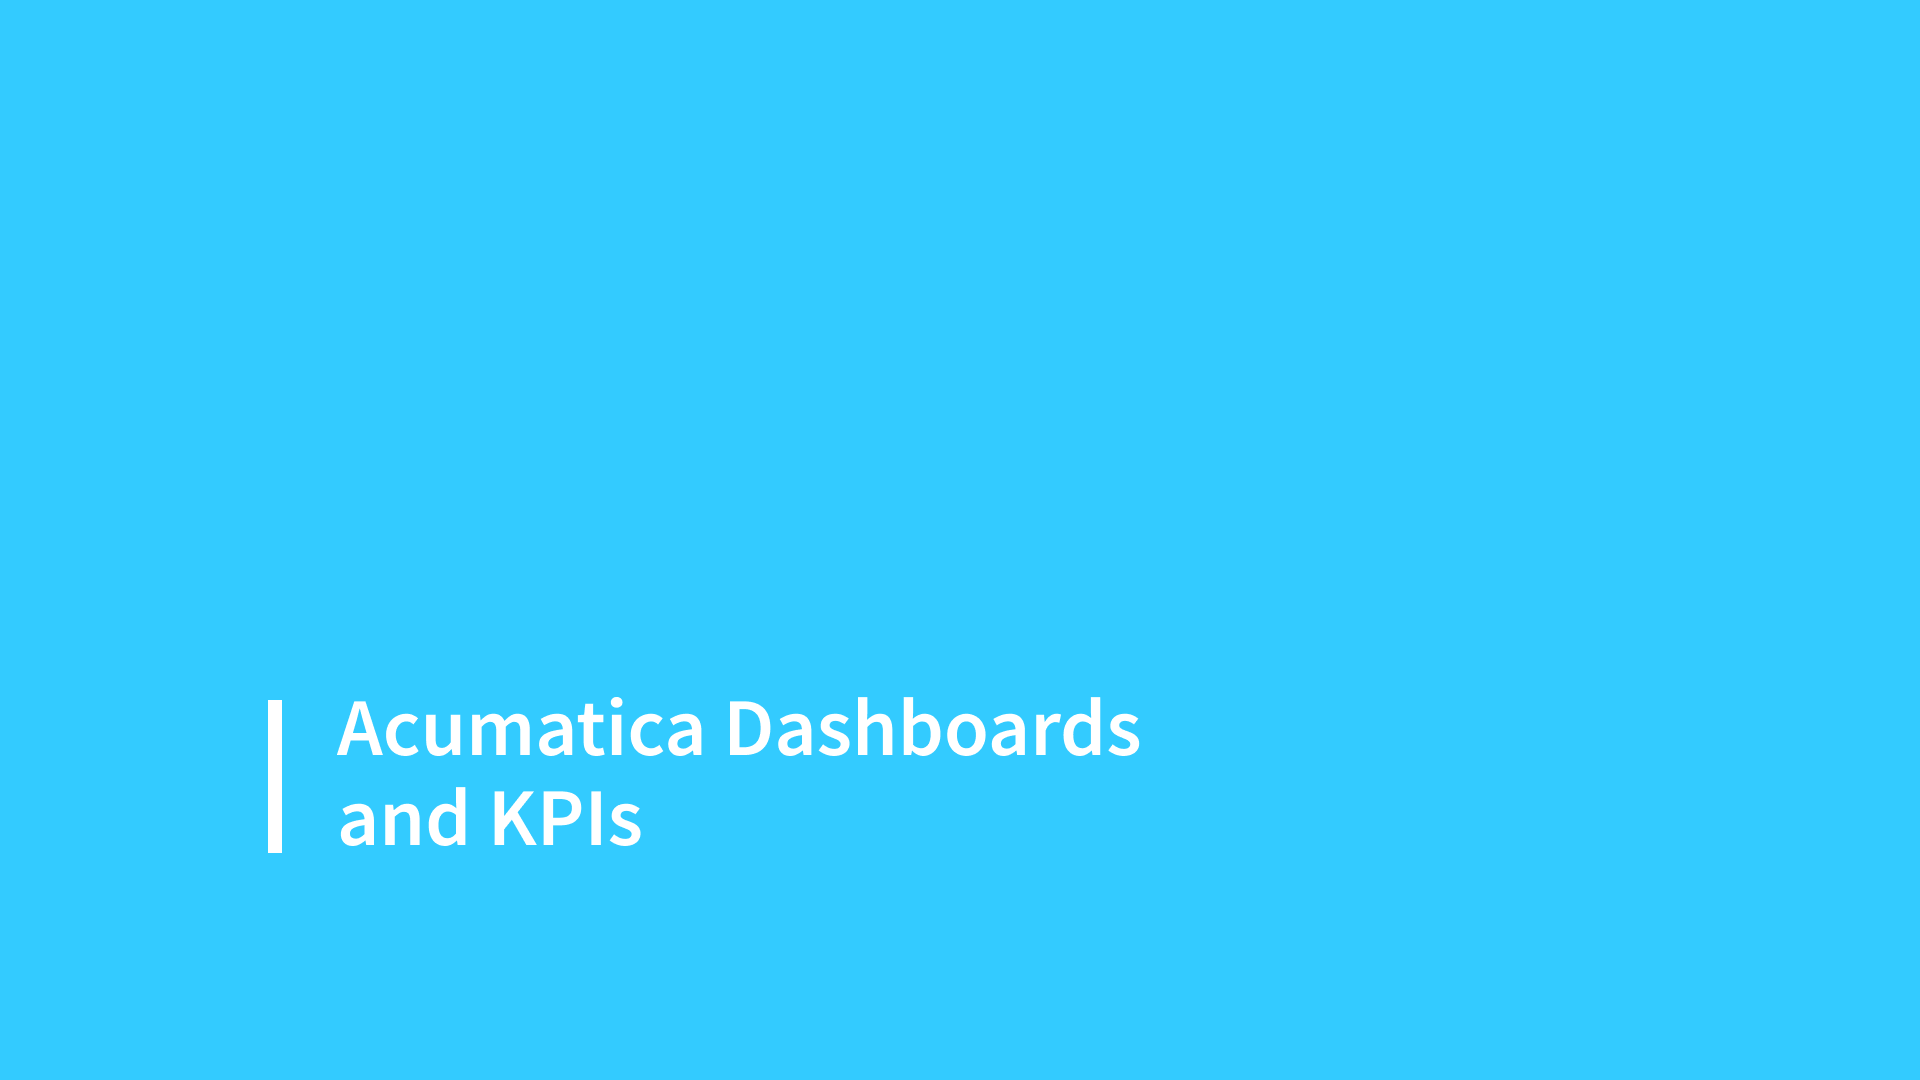 Acumatica Dashboards and KPIs